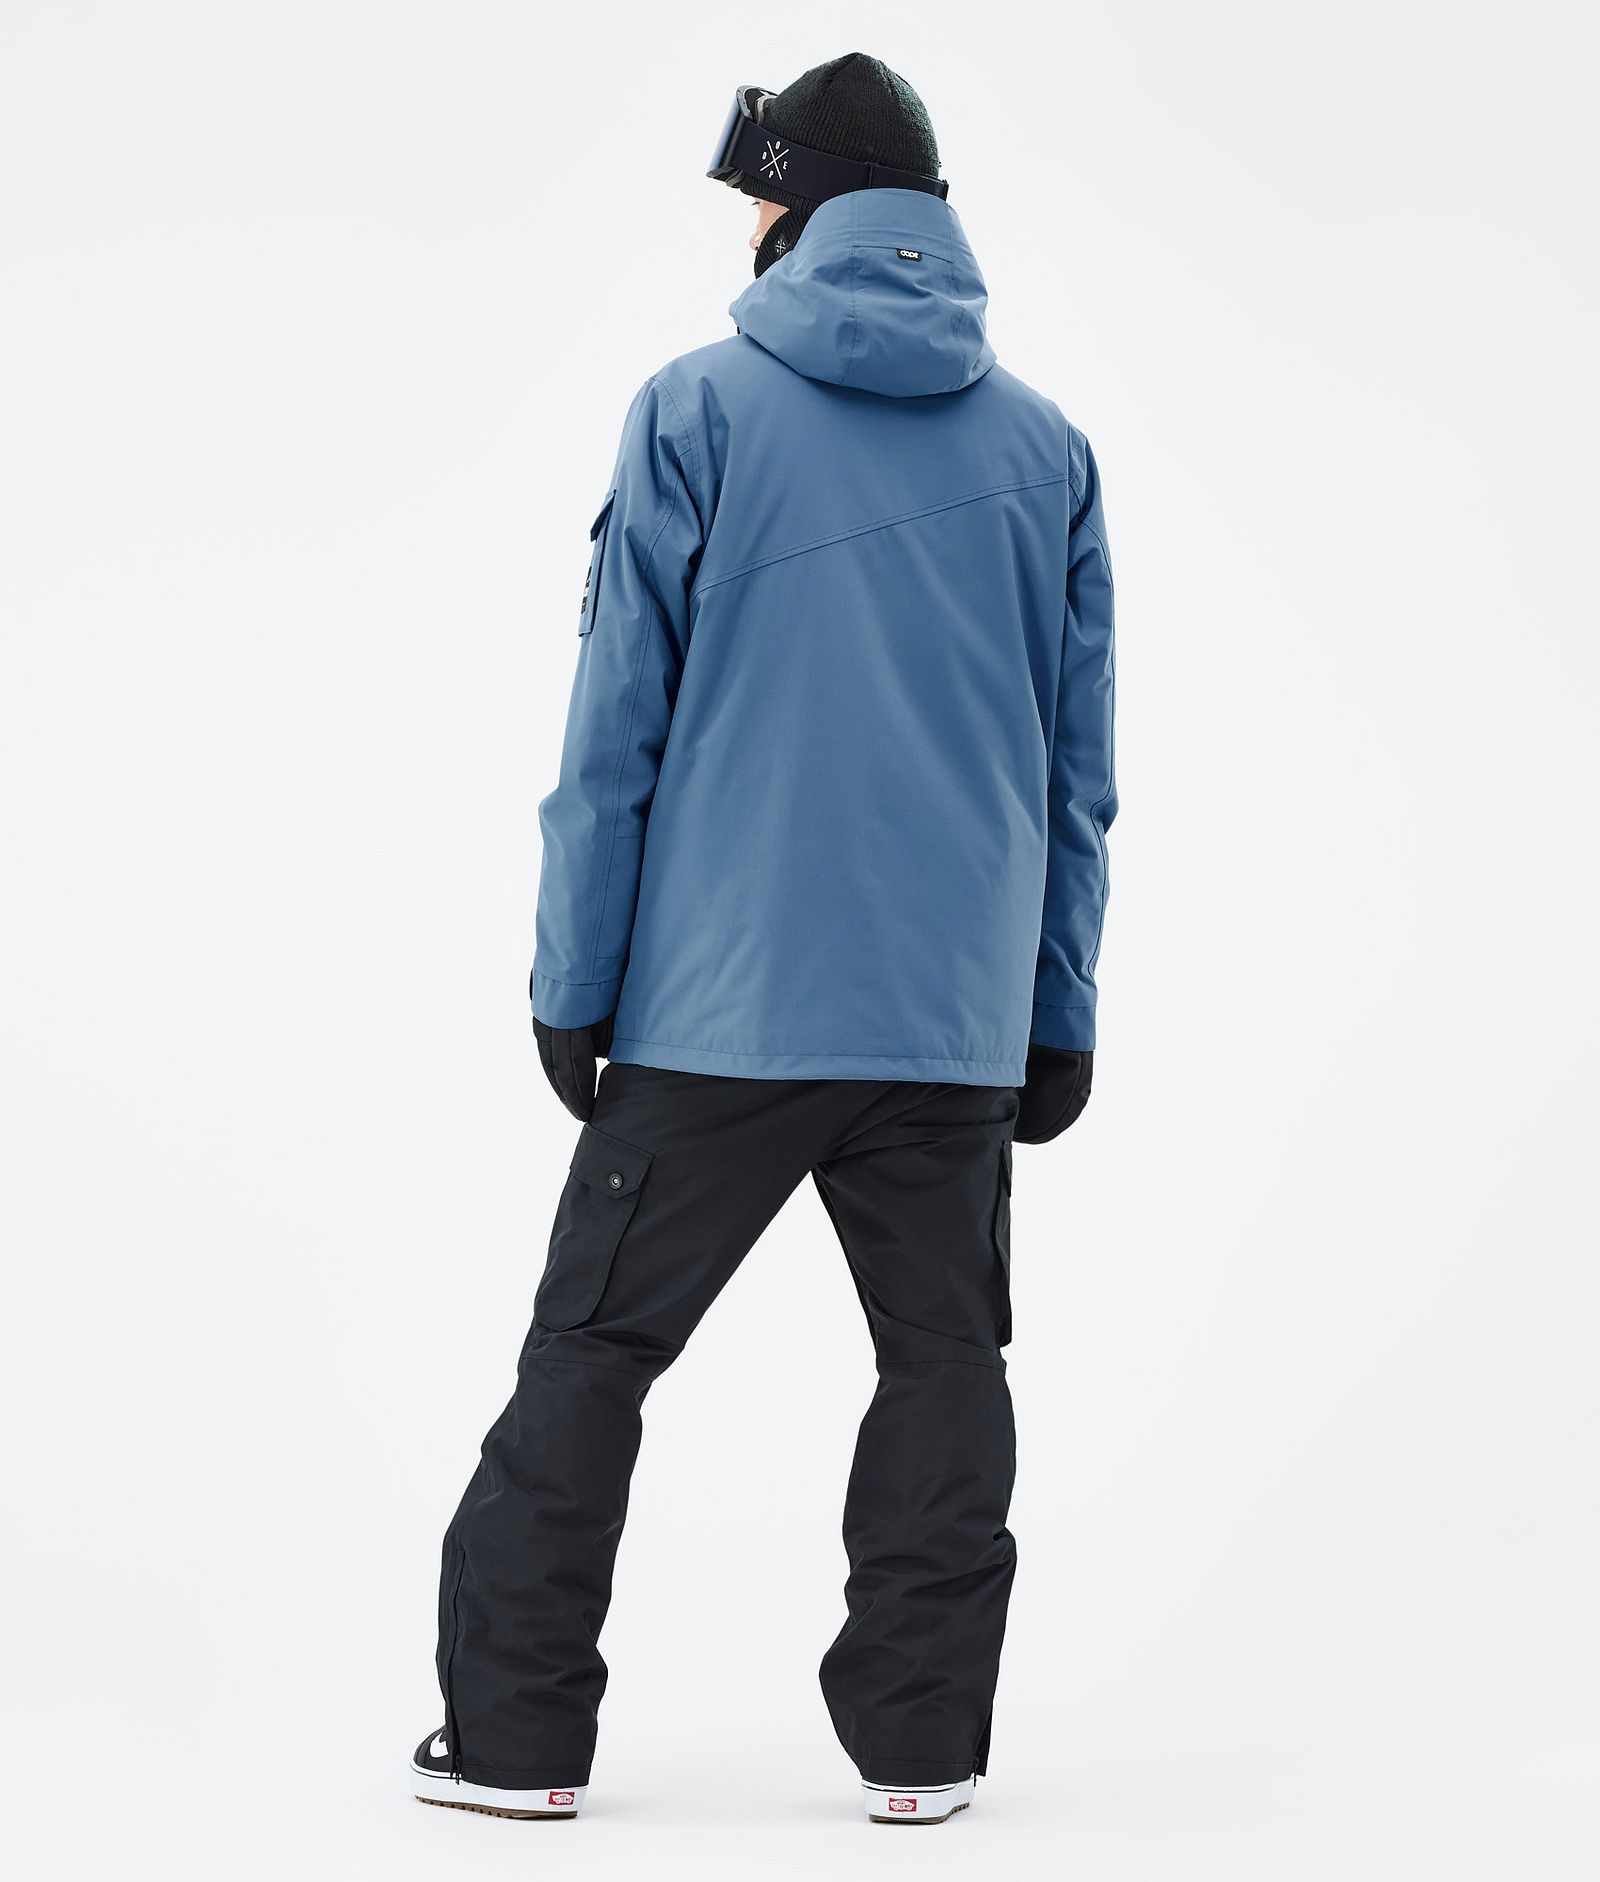 Adept Outfit Snowboard Uomo Blue Steel/Blackout